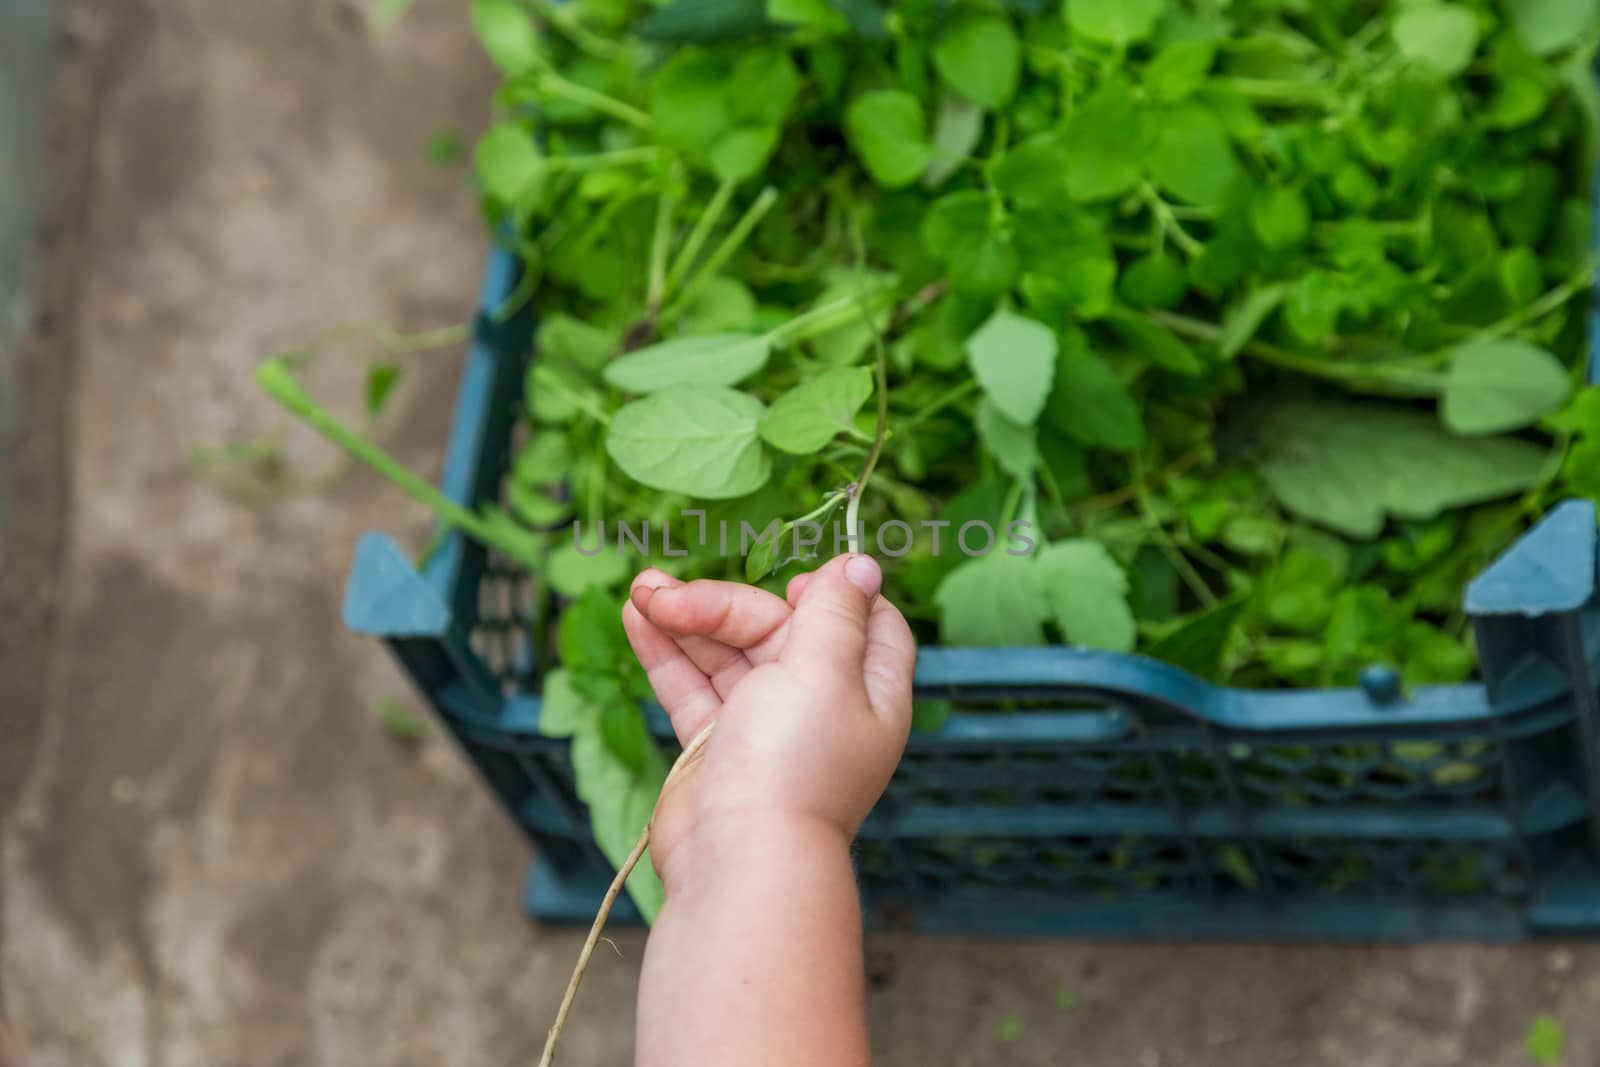 Close-up of a child's hand holding a blade of grass in the greenhouse of a house by galinasharapova